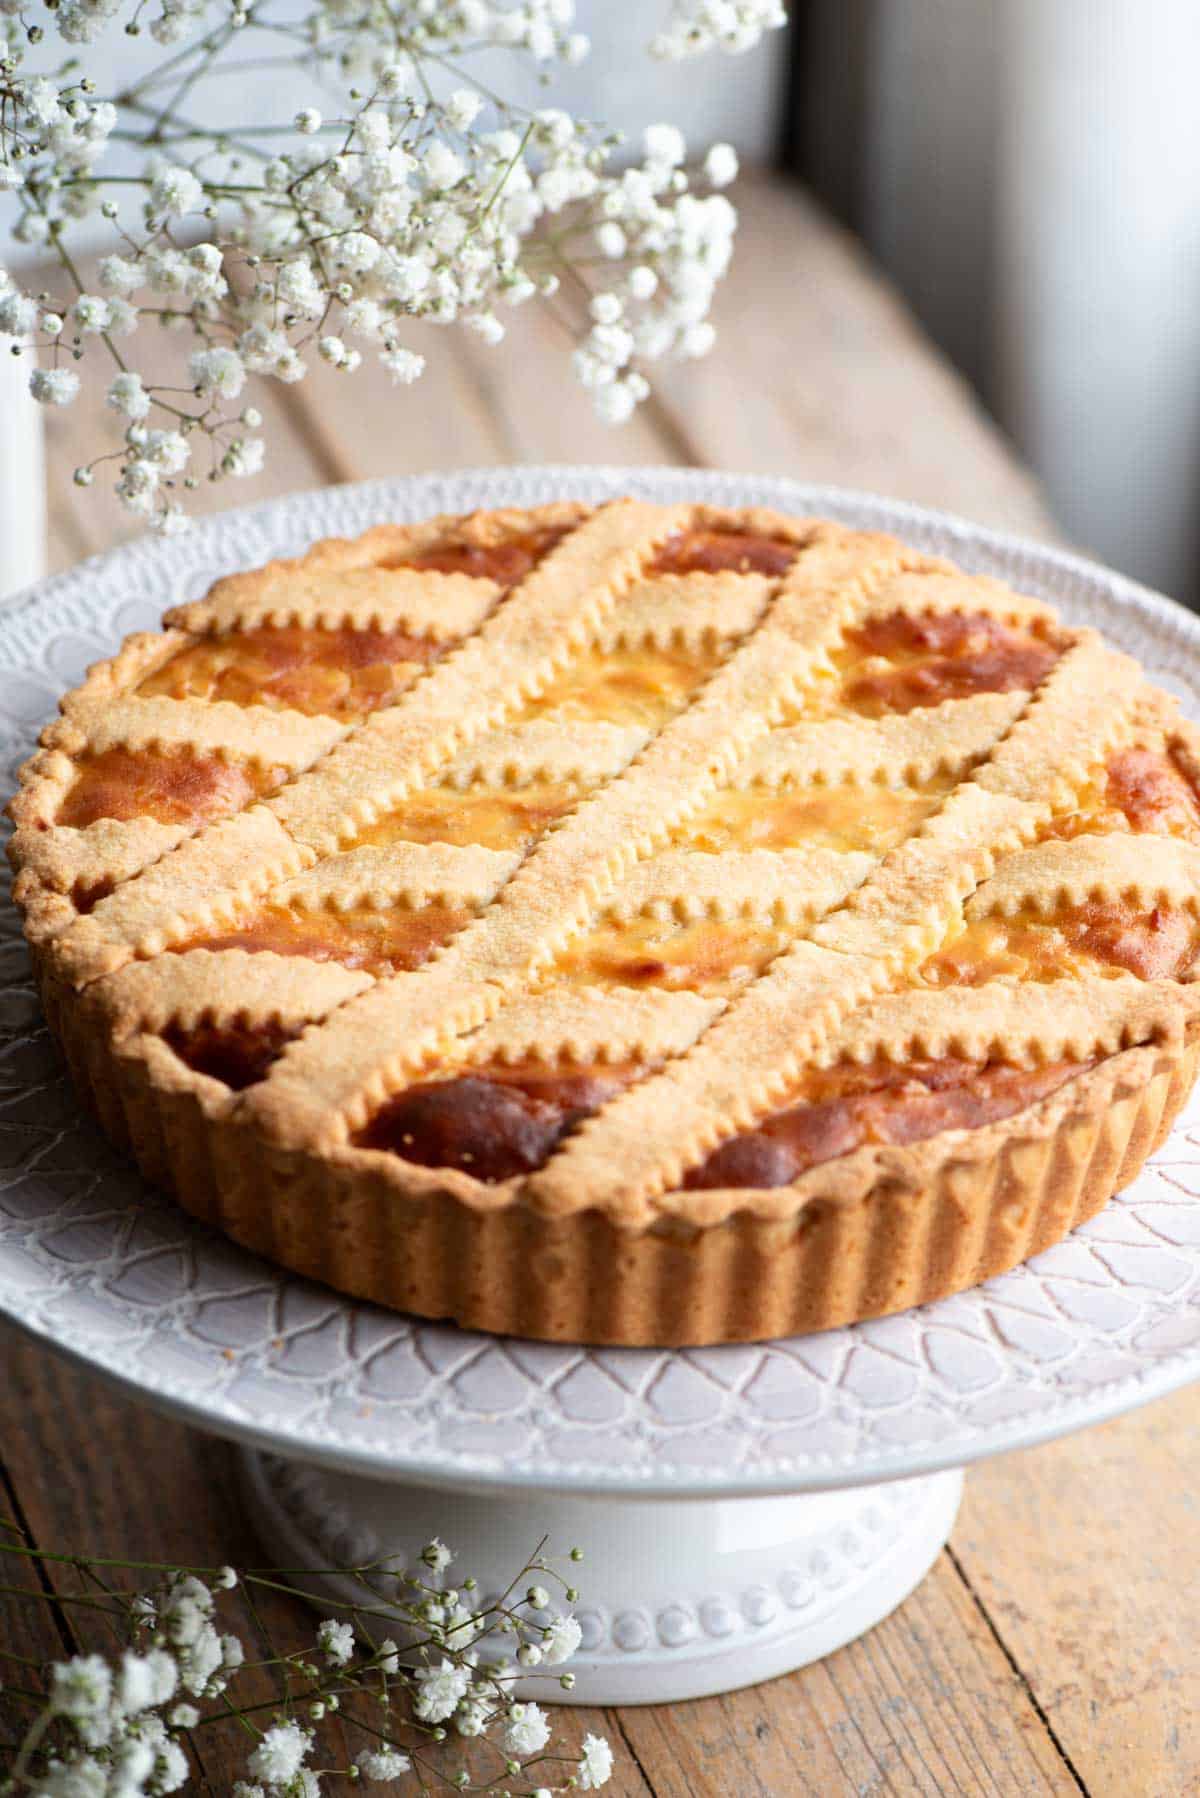 Pastiera Napoletana on a cake stand sitting on a wooden surface with white flowers at the side.